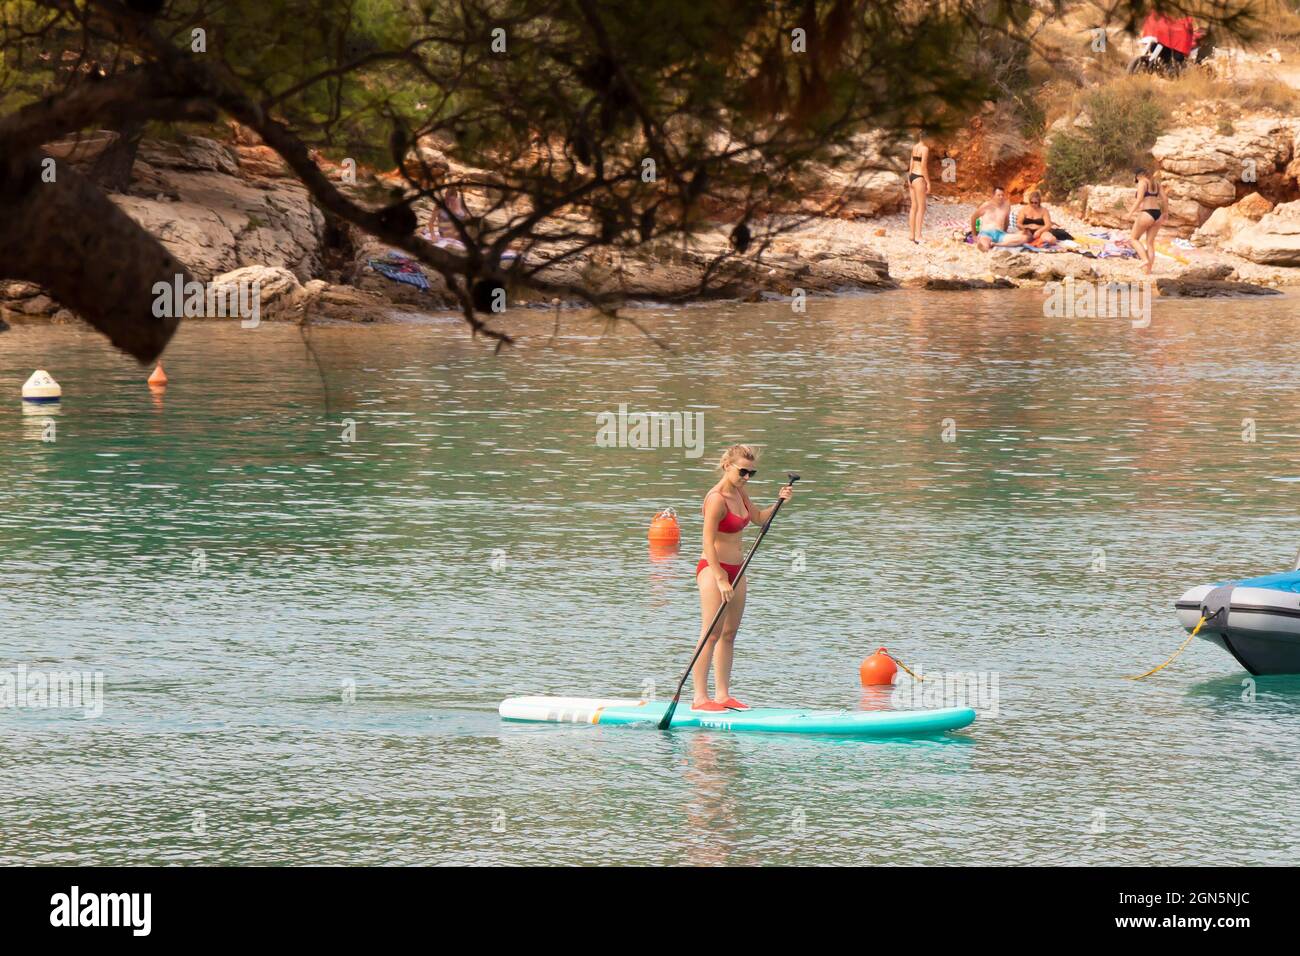 Kosirina, Murter, Croatia - August 24, 2021: Young woman in red swimsuit paddling on stand up board, on the beach, through pine tree Stock Photo